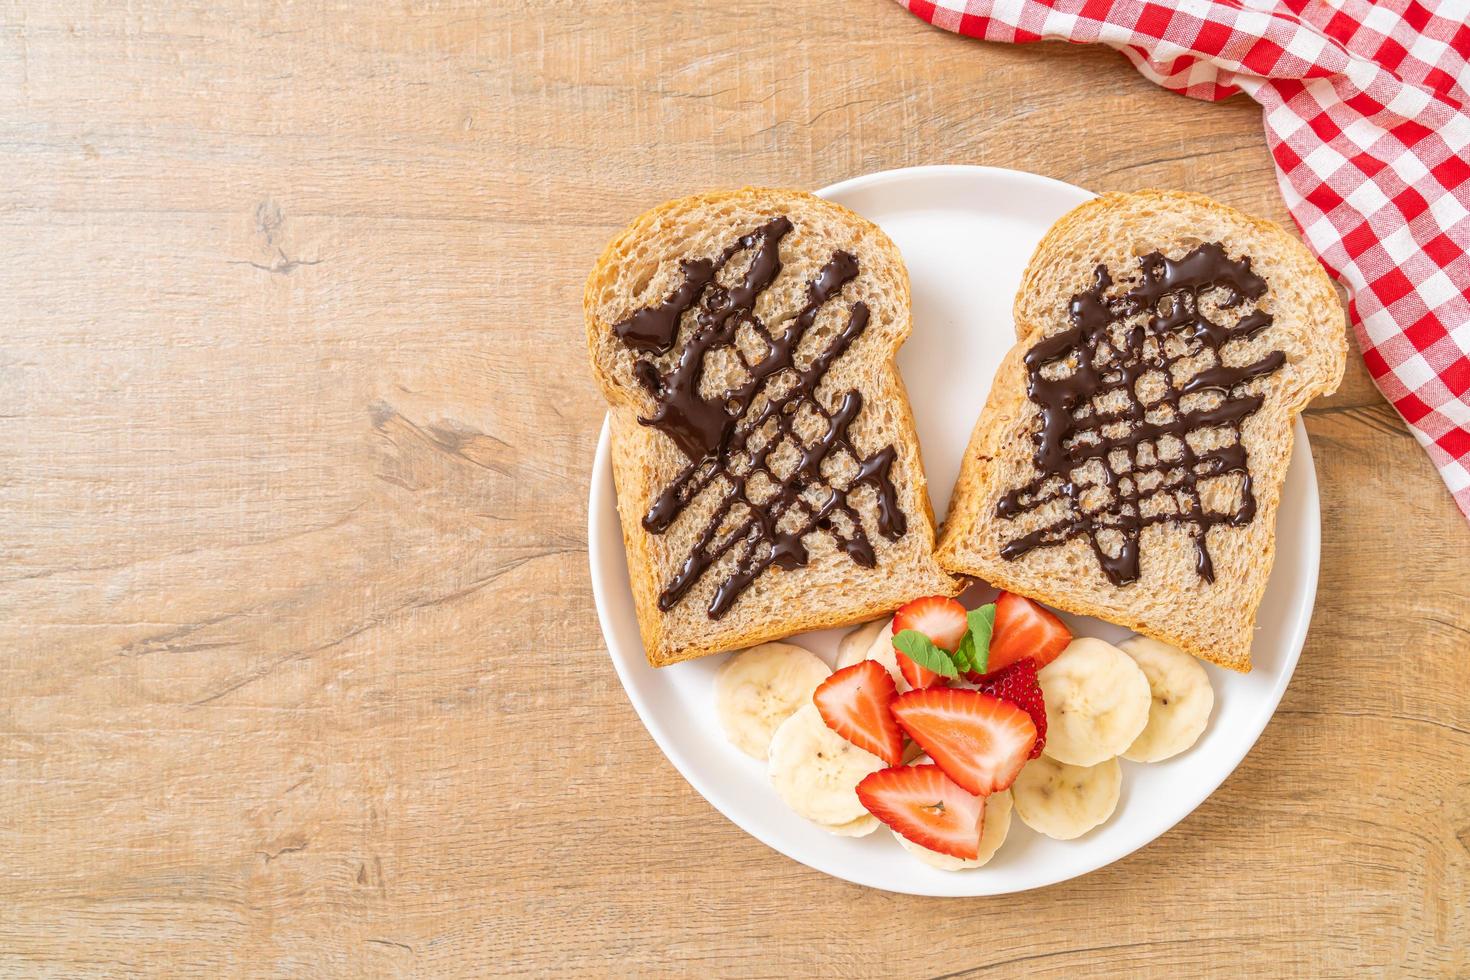 Whole wheat bread toasted with fresh banana, strawberry, and chocolate for breakfast photo